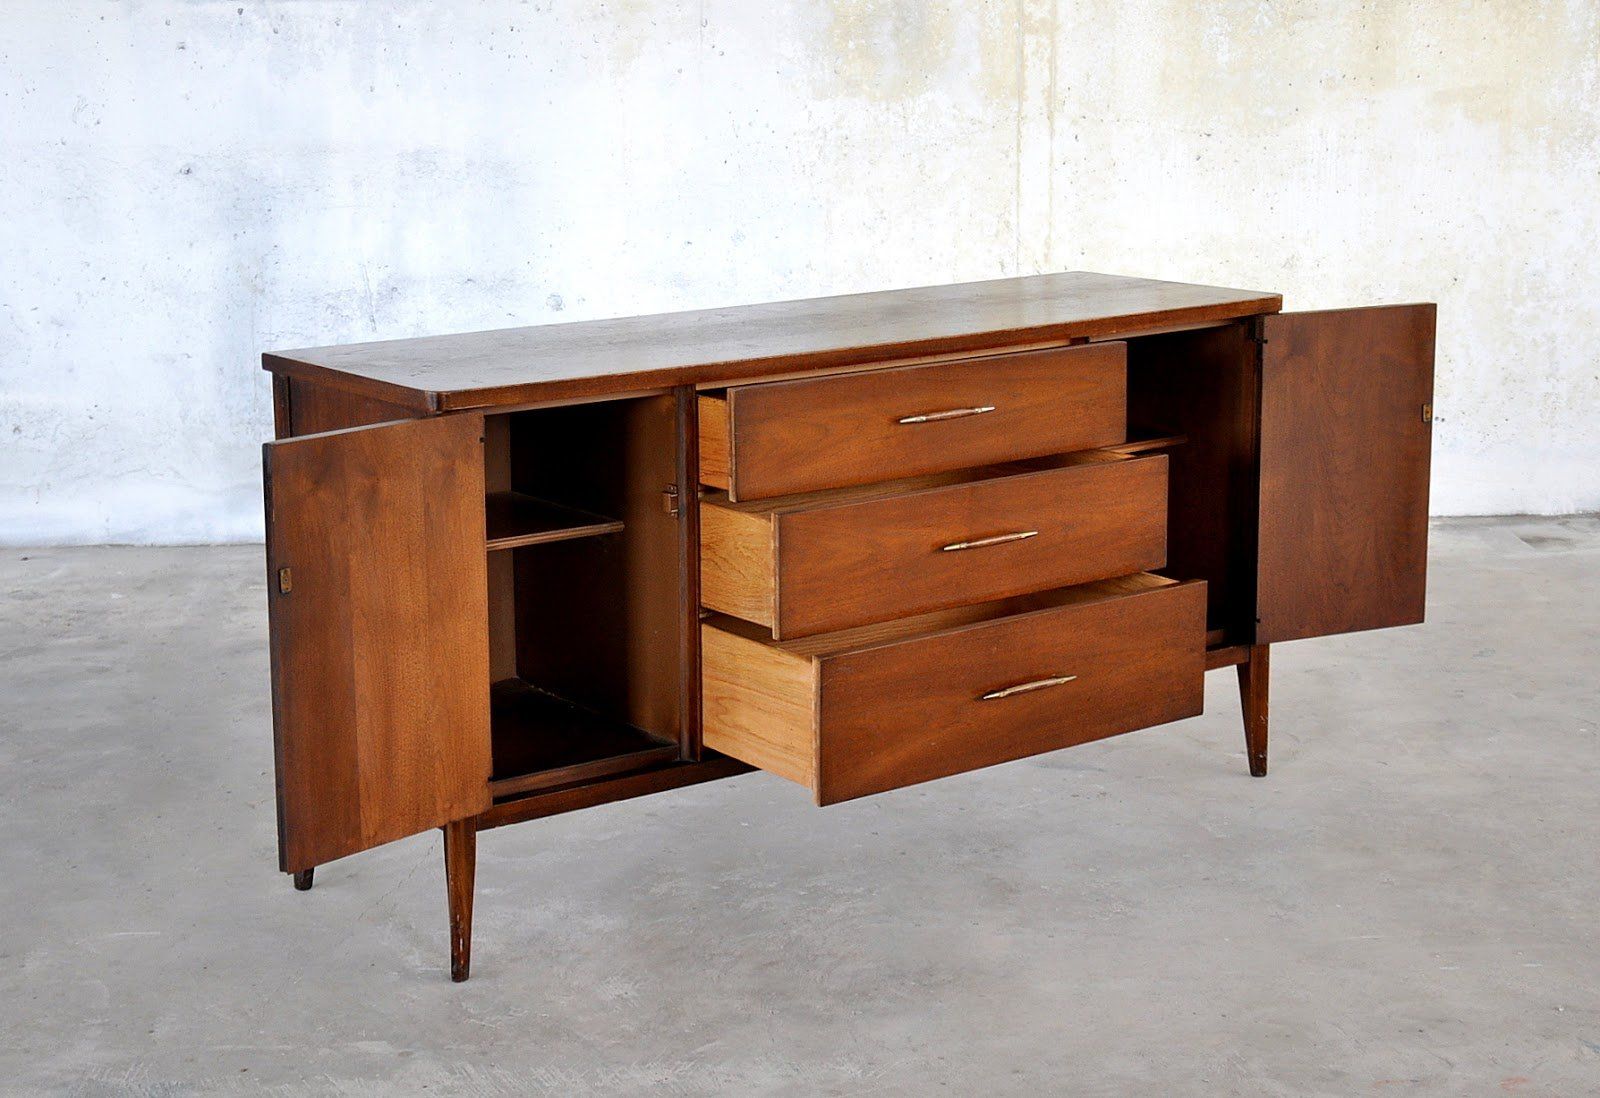 Select Modern Mid Century Modern Credenza Buffet St Croix Pertaining To Modern Mid Century Buffets (View 26 of 30)